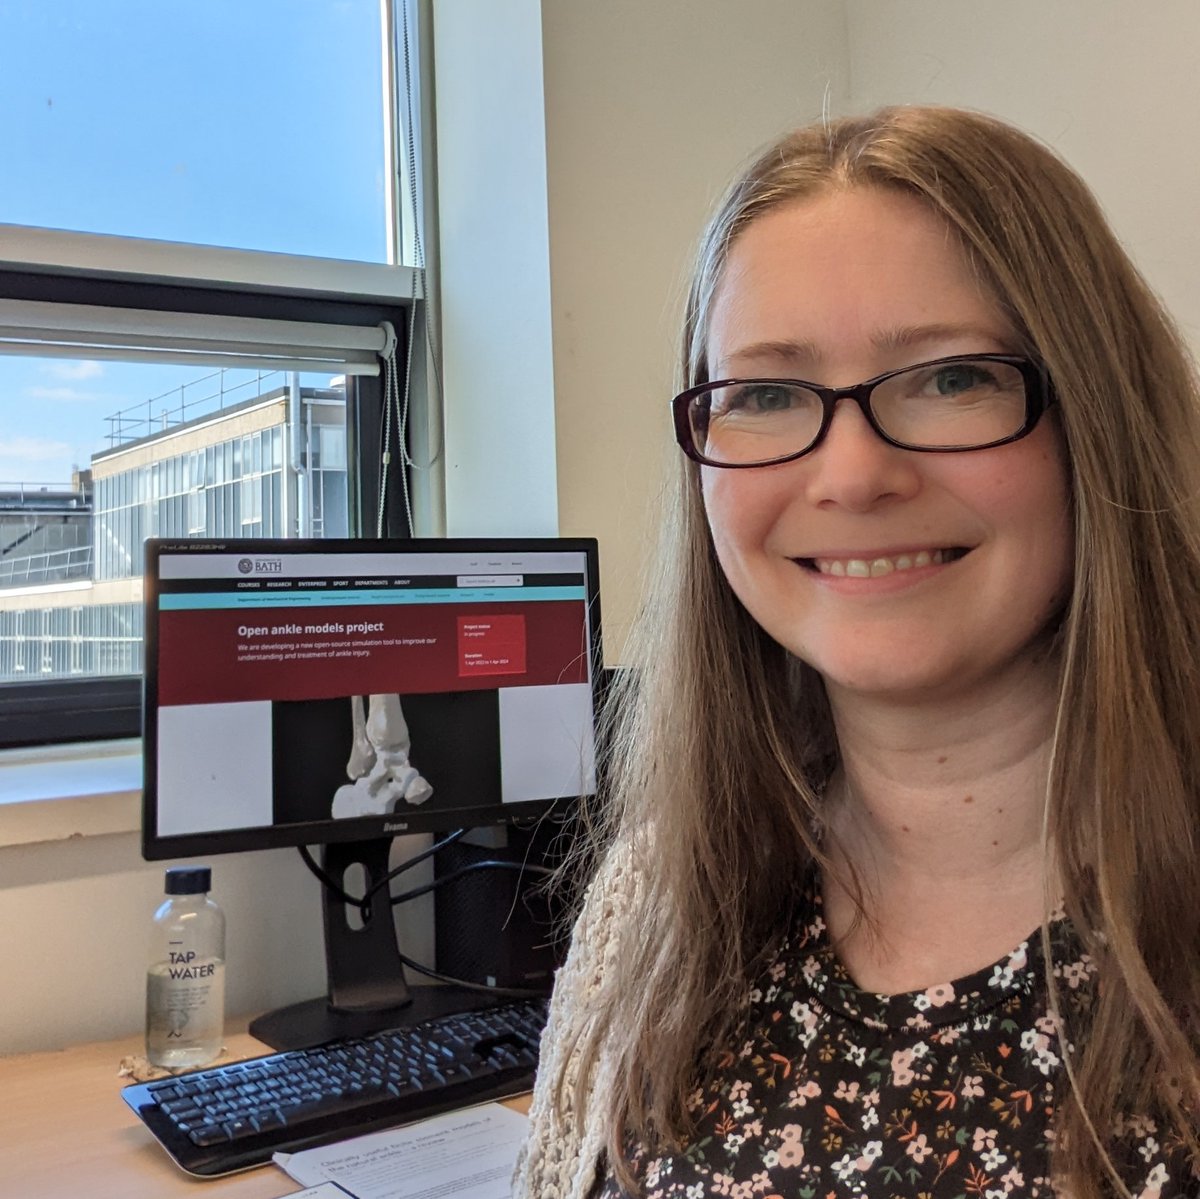 @elisepegg, Senior Lecturer in the @bathenganddes Department of Mechanical Engineering, is a recipient of the Early Career Research Fellowship for her project developing an open-source finite element ankle model. 
Read more: bit.ly/3TU9rnk

#Investinginourfuturemovement